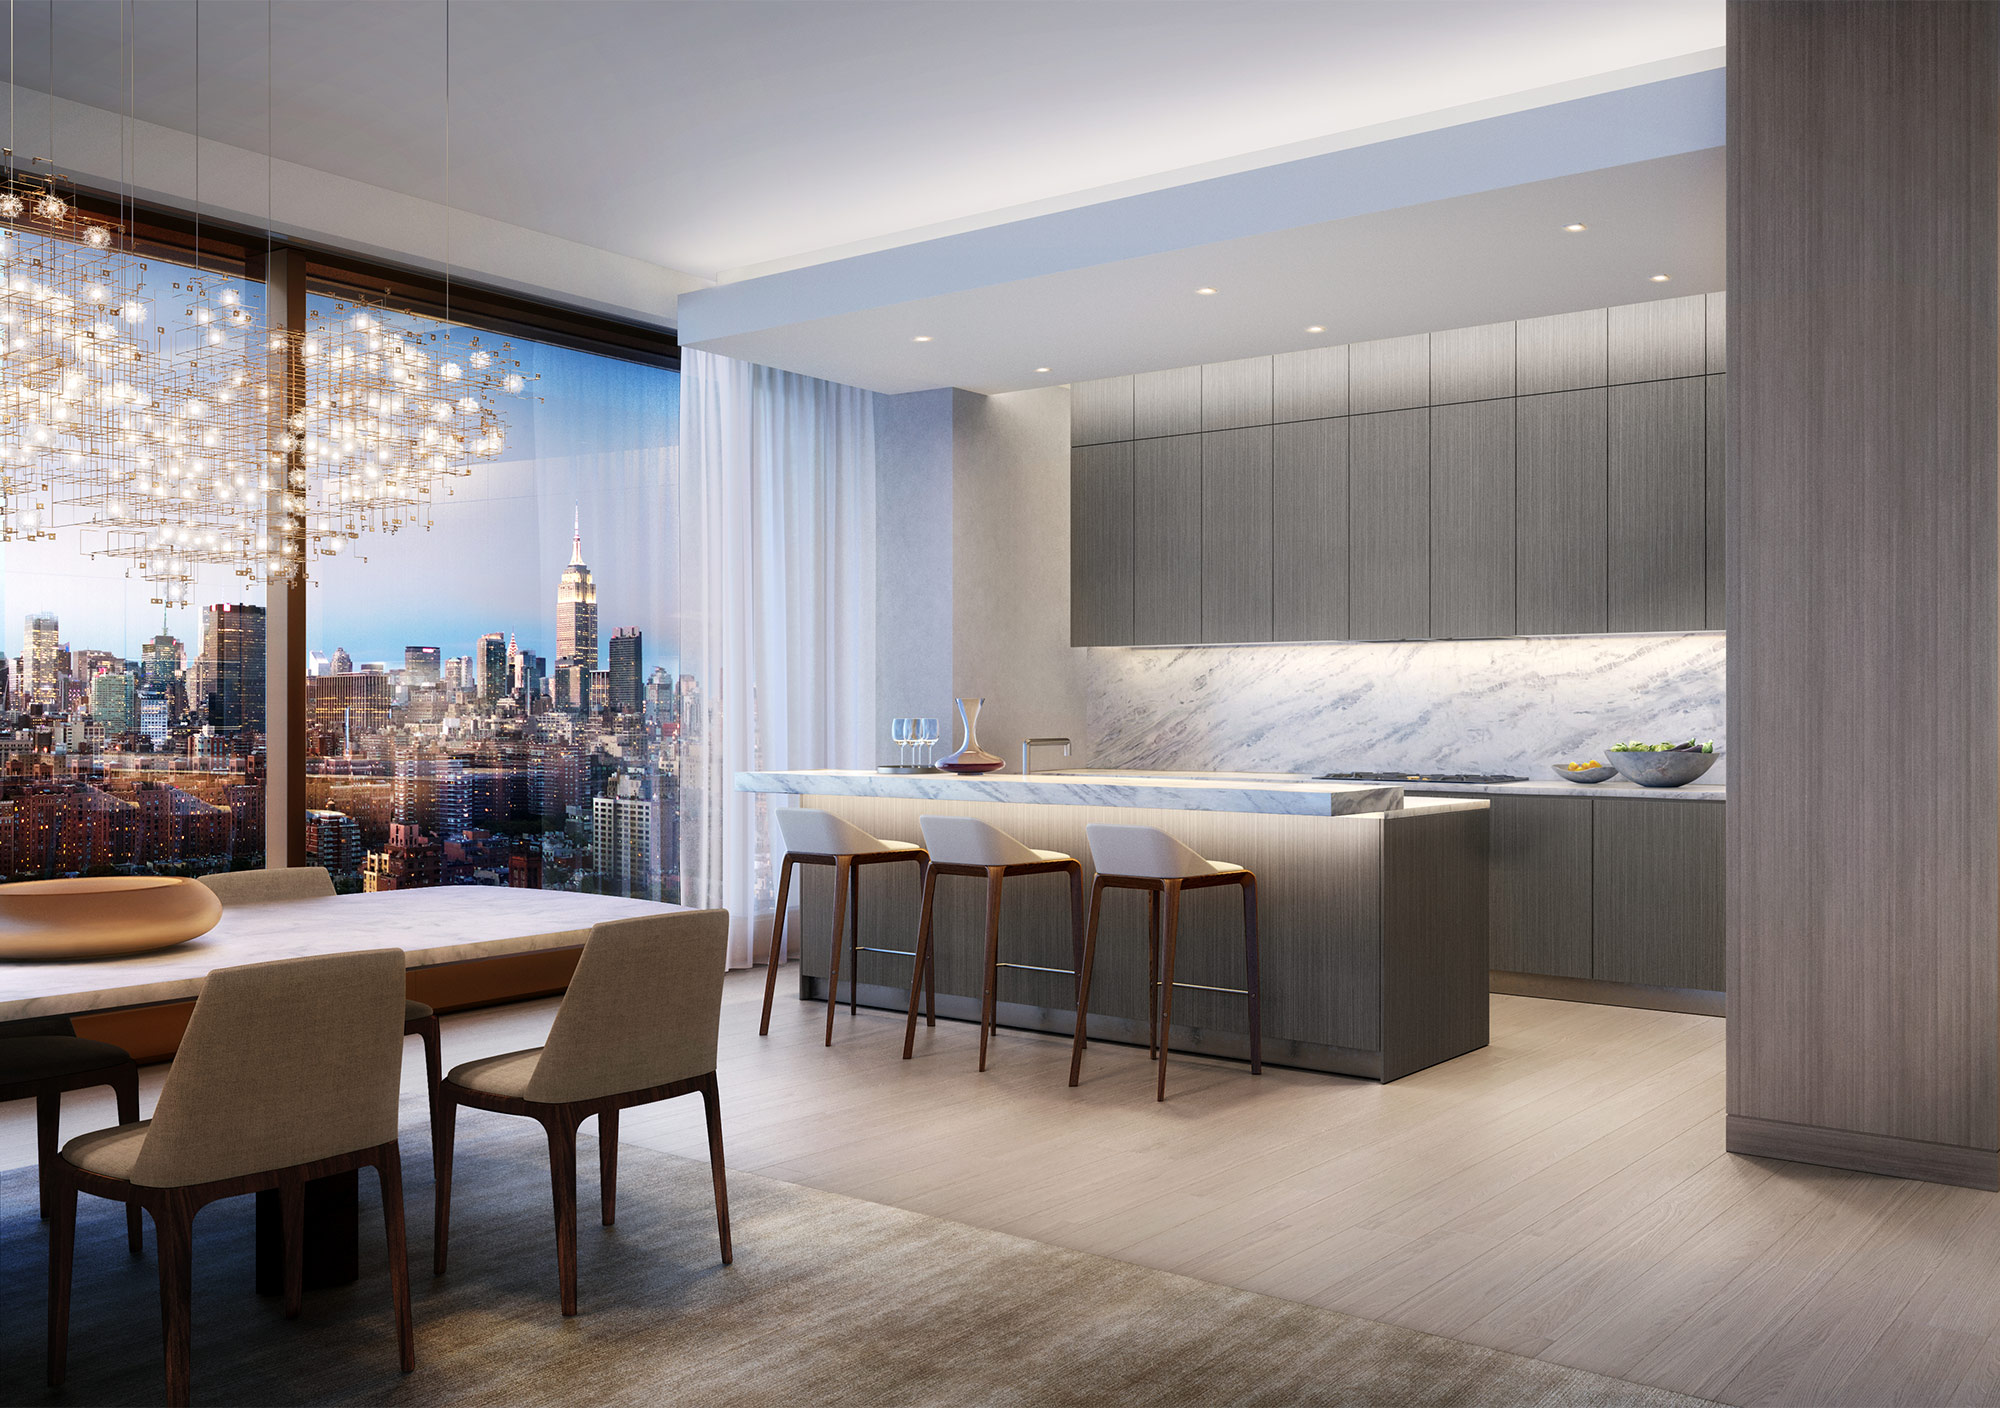 Luxurious kitchen and dining room with a city view